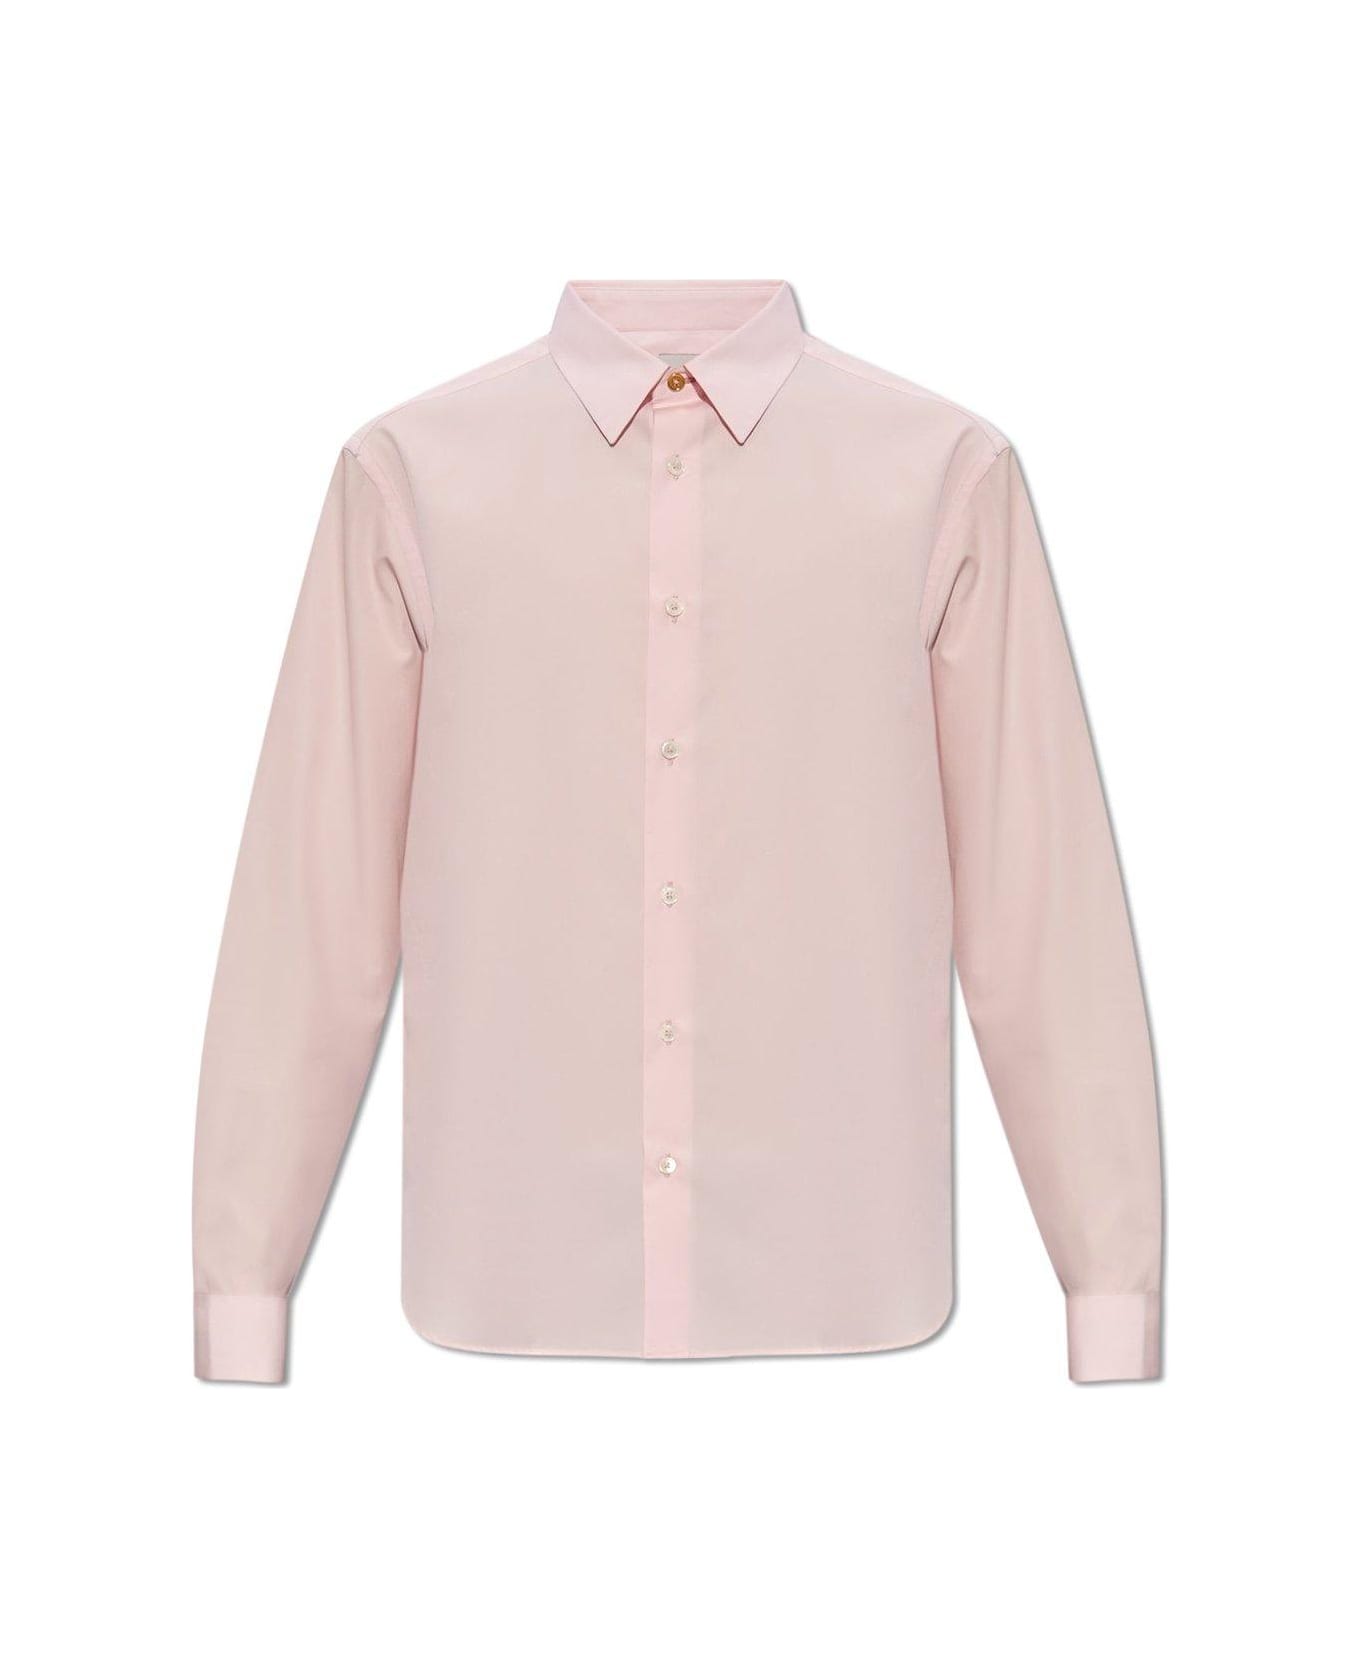 PS by Paul Smith Tailored Shirt Shirt - POWDER PINK